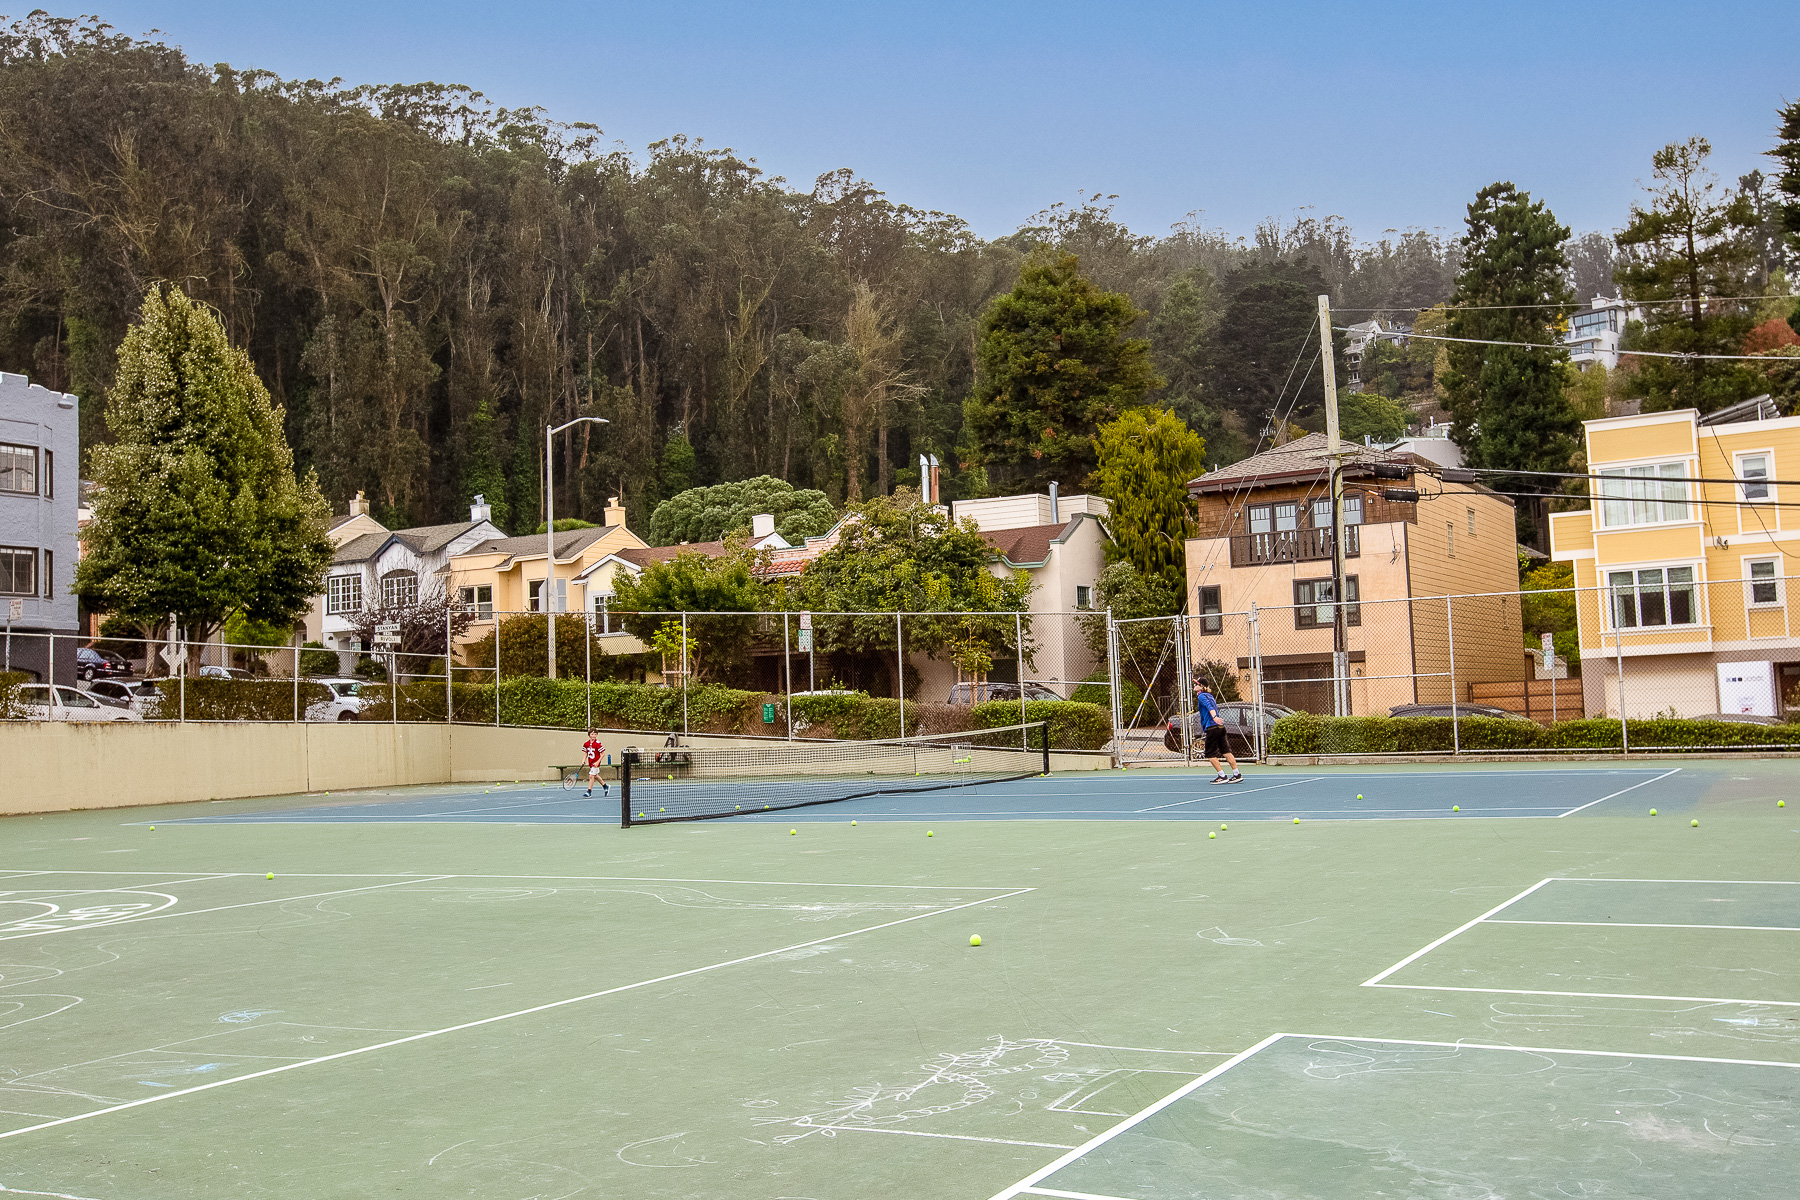 Property Photo: View of the tennis courts at nearby Grattan Playground